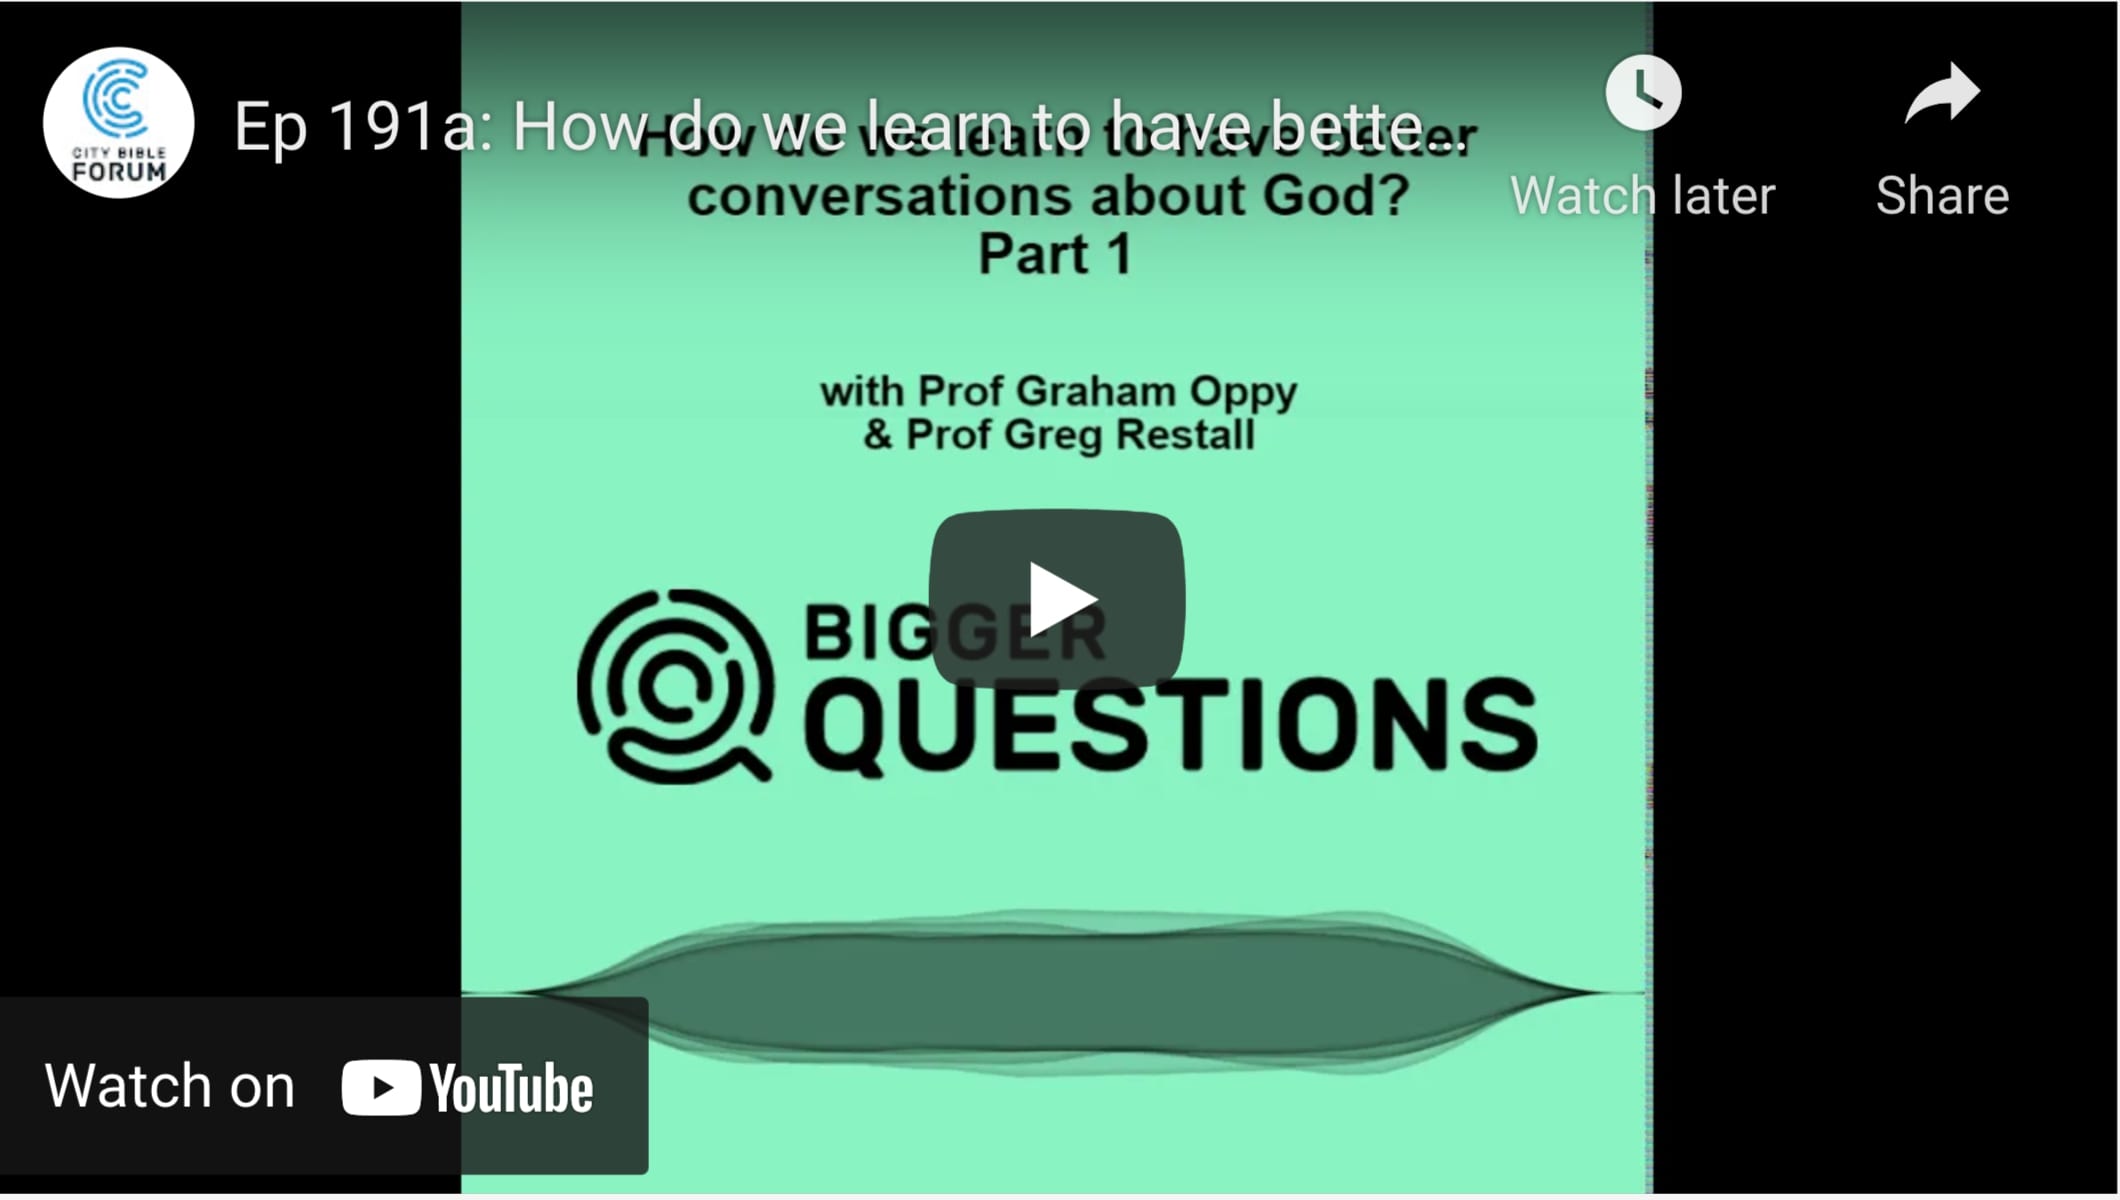 Part 1 - how do we have better conversations about God? With Professor Graham Oppy and Professor Greg Restall 